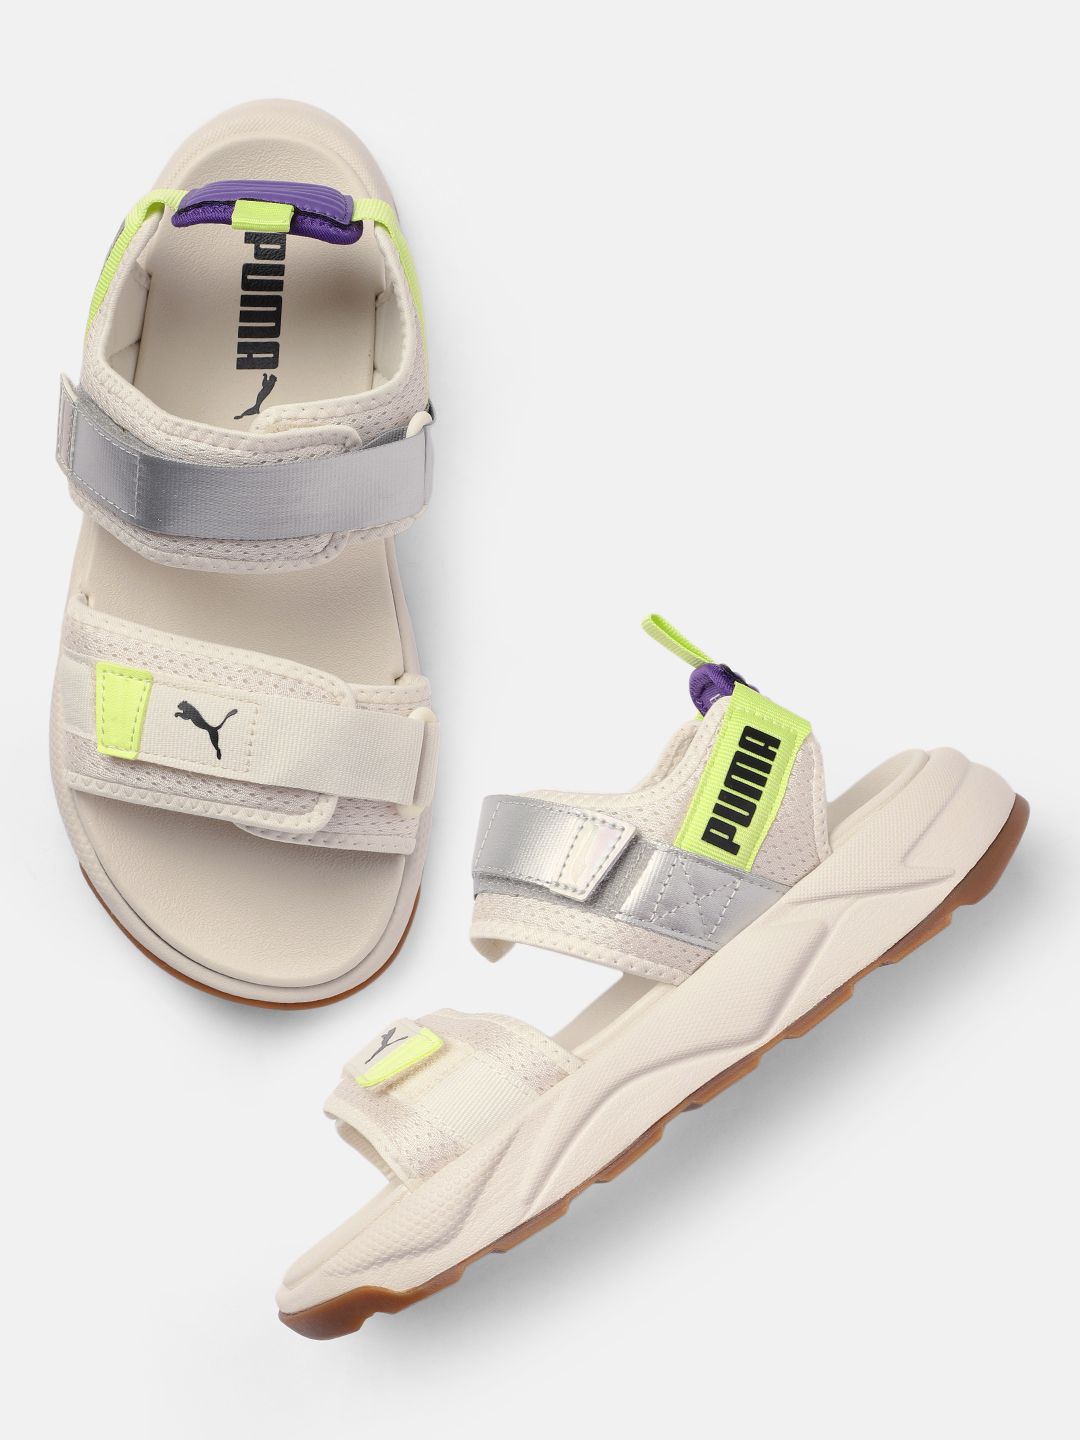 Puma Unisex Off-White RS Sports Sandal Price in India